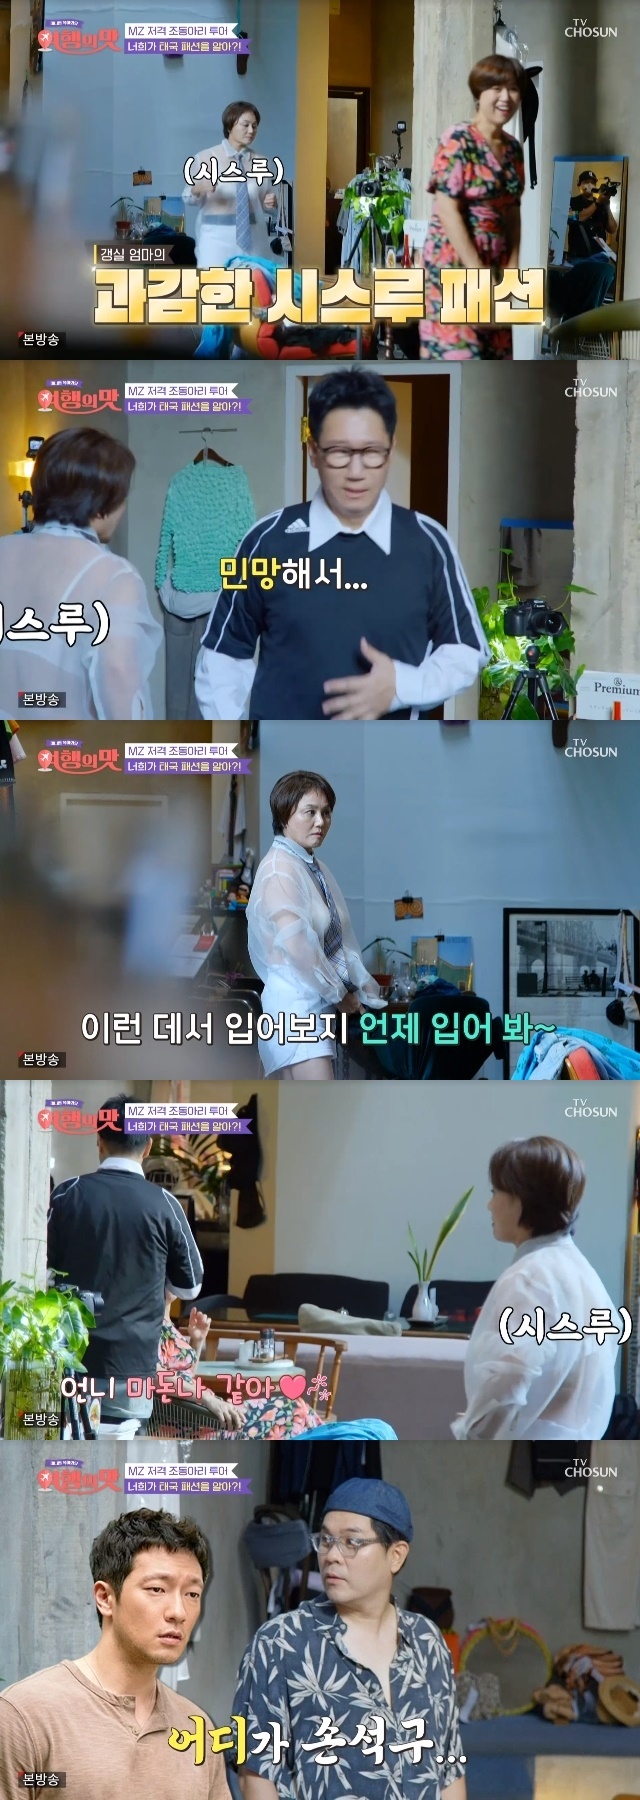 Kyeong-shil Lees unconventional see-through fashion made everyone amazed.In the fifth episode of the TV Chosun entertainment show Taste of Travel, which aired on October 28, Jo Dong-ri (Kim Yong-man, Ji Suk-jin, Kim Soo-yong) and Sen Sisters (Kyeong-shil Lee, Park Mi-sun, Jo Hye-ryun) continued their trip to Bangkok, Thailand.Kyeong-shil Lee, who visited Bangkoks editorial shop on the same day as Jo-dong led, appeared as an extraordinary and bold See through fashion and focused attention.Ji Suk-jin, who saw Kyeong-shil Lee, expressed surprise, saying, I will not be able to look at it because I am embarrassed.Kyeong-shil Lee said, When do you try it on like this?Park Mi-sun, who opened his mouth for the first time, praised it as Sister Madonna, but Jo Hye-ryun, who appeared afterwards, asked the production crew to mosaic and gave a laugh.Jo Hye-ryun also gave a fish doll to Kyeong-shil Lee to hold.